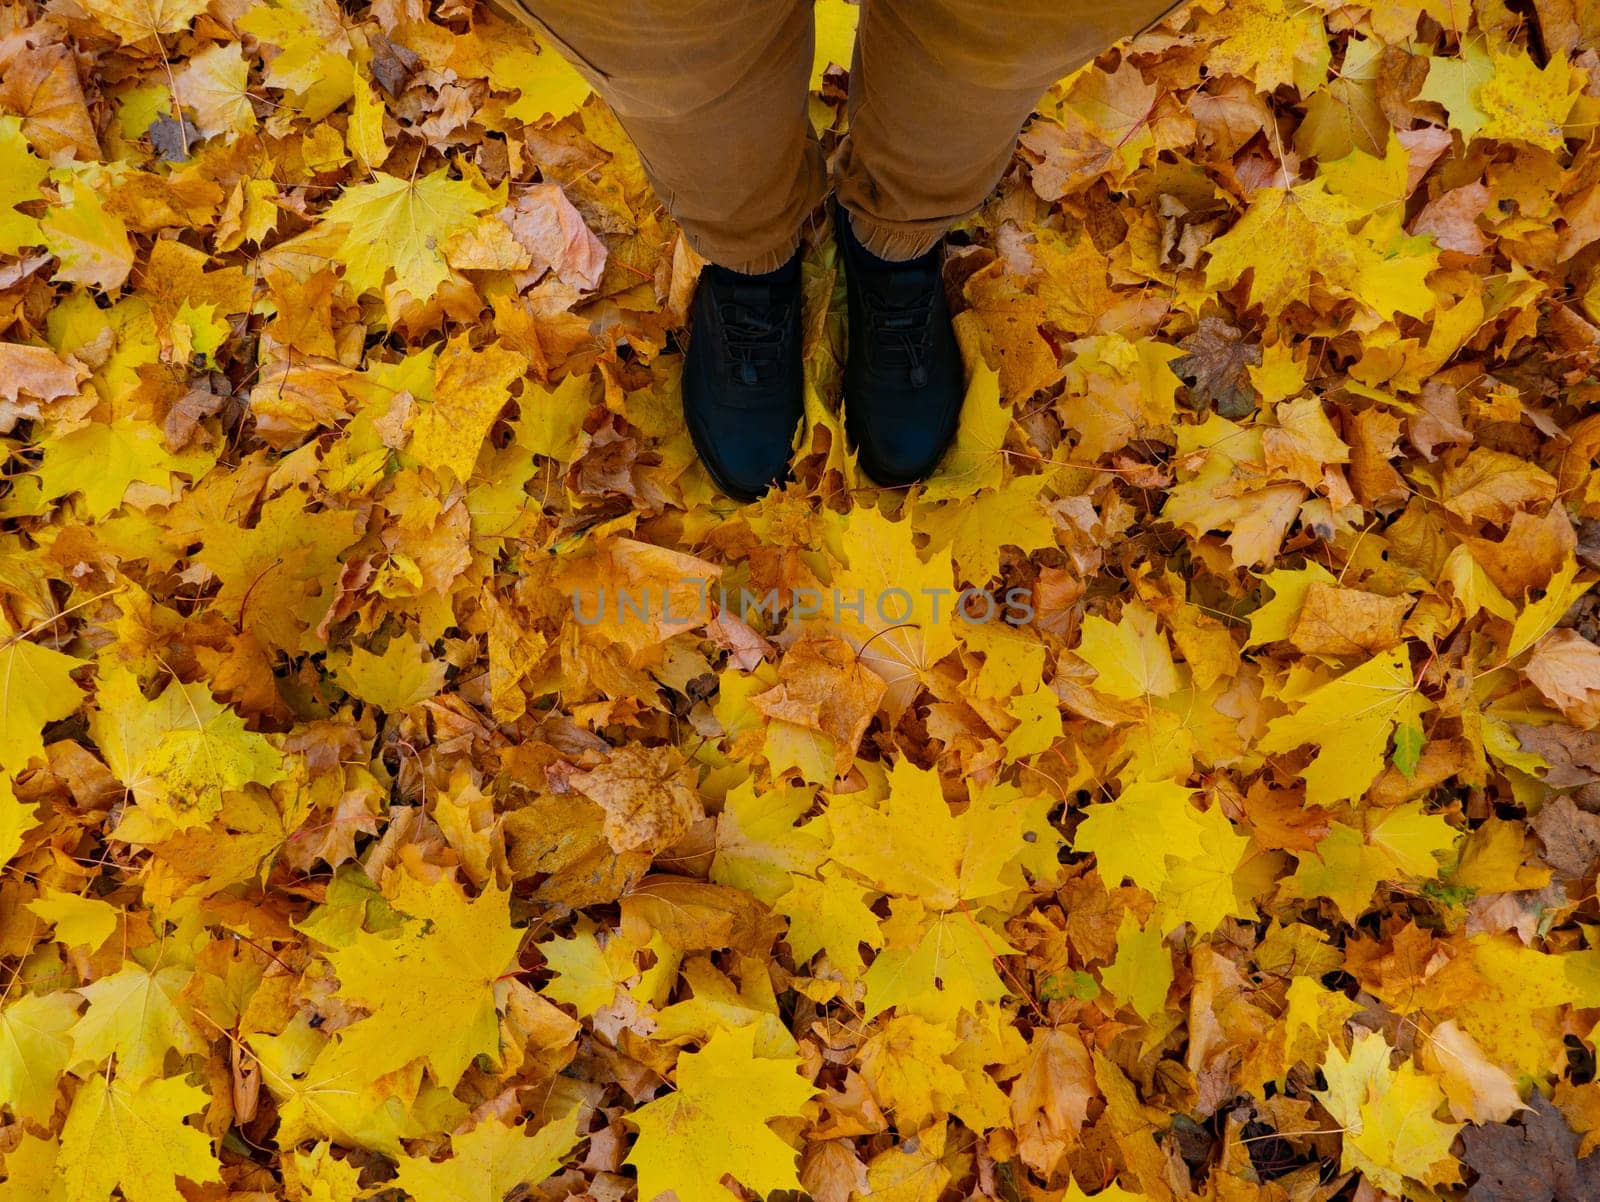 Top view of a man's shoes on a layer of yellow autumn leaves fallen from the trees, autumn photo of the change of season. by zartarn